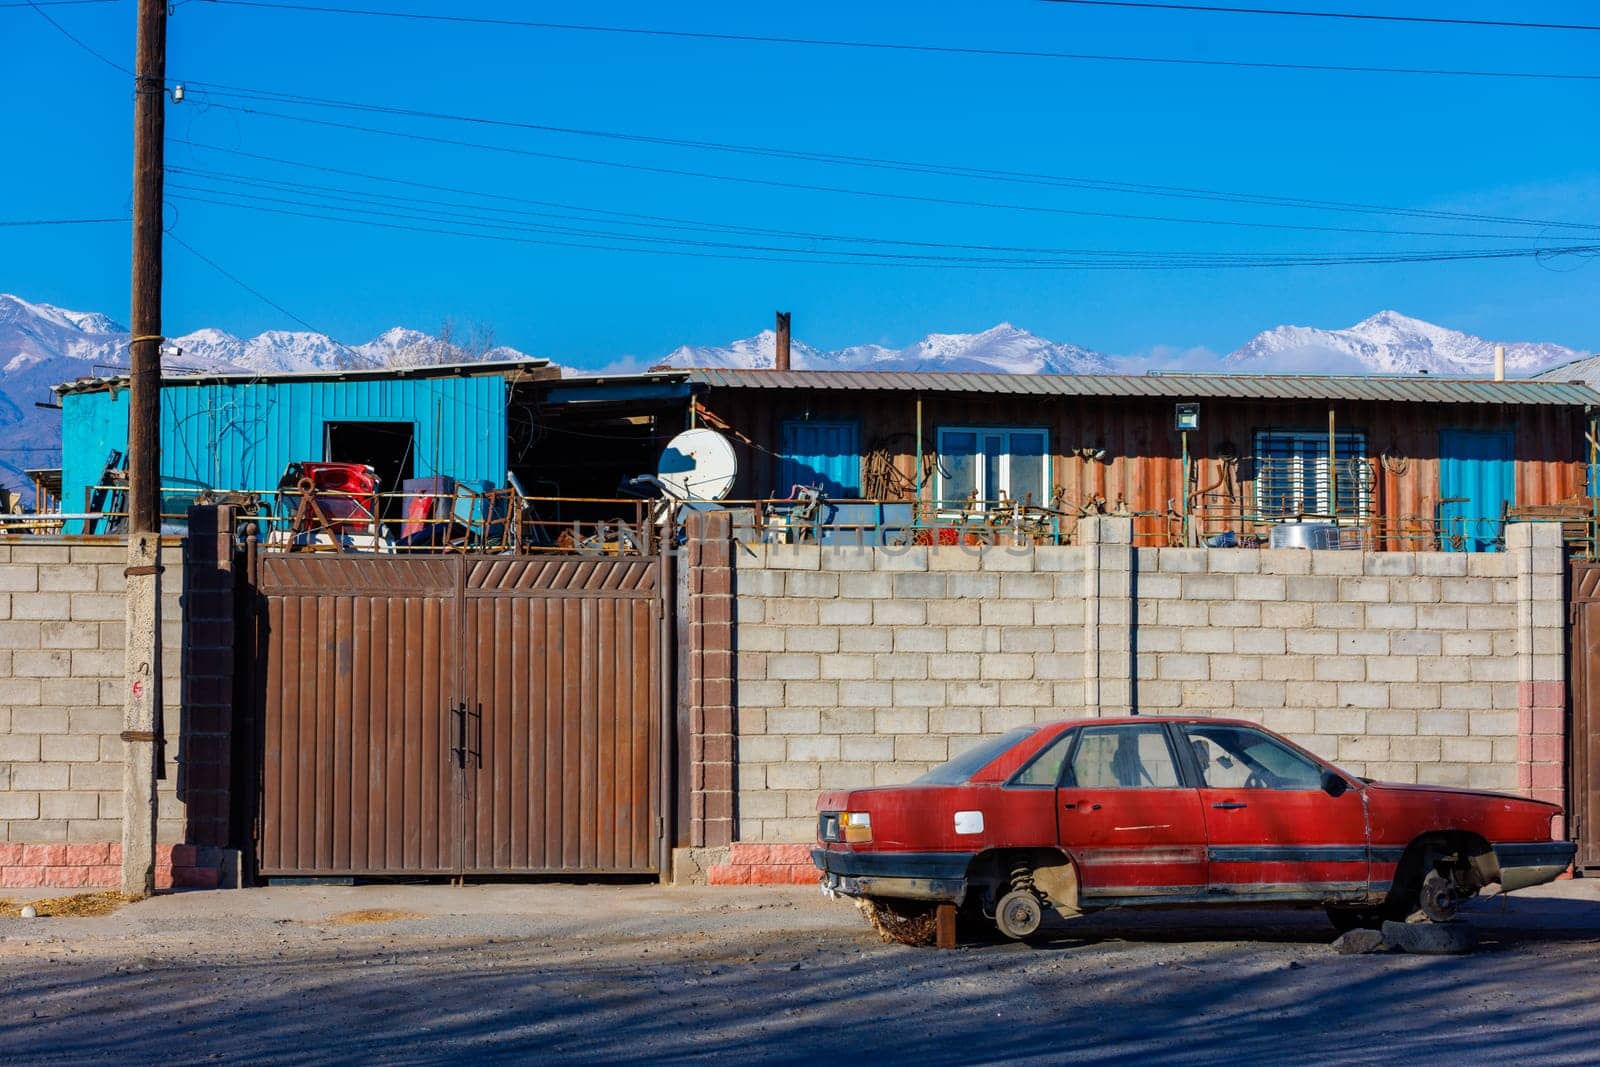 Red junked car without wheels in front of brick fence of junkyard, outside at sunny afternoon.